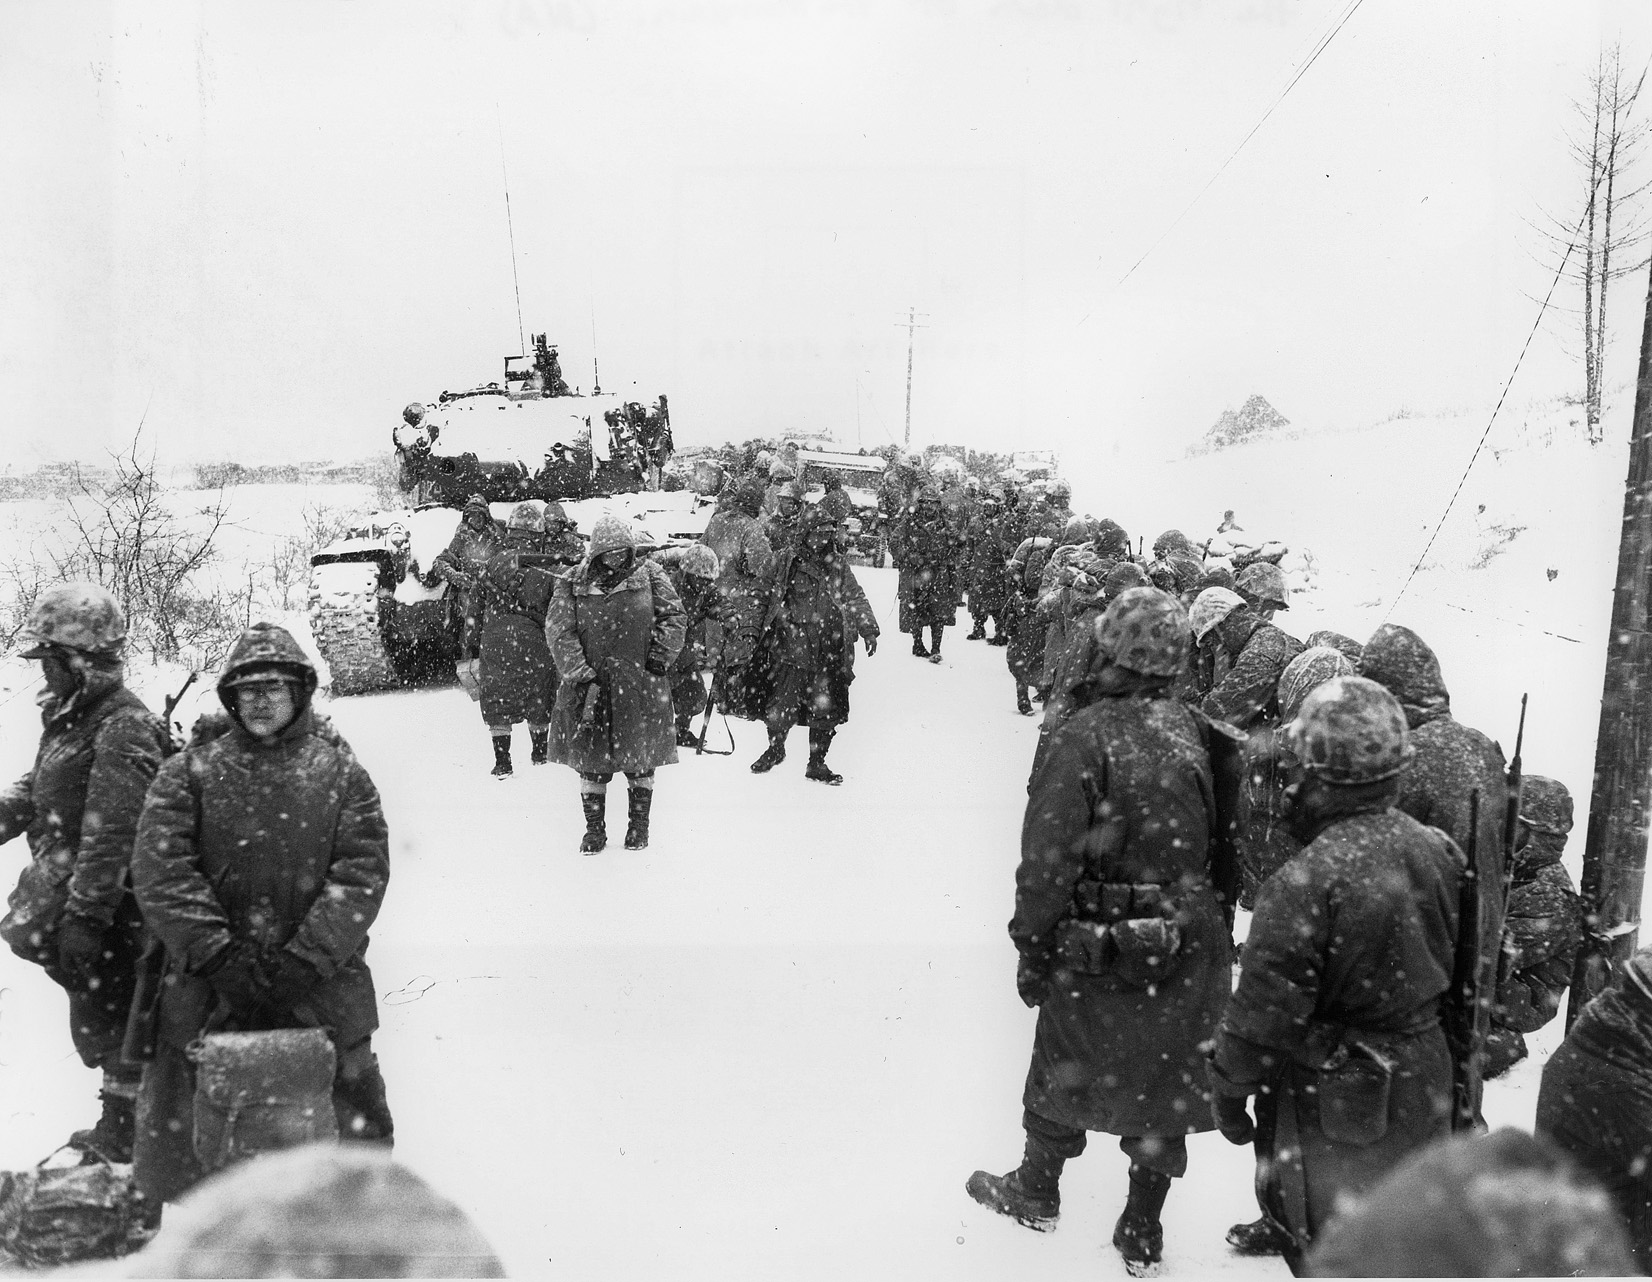 U.S. Marines suffering from exposure to freezing weather retreat from their advanced positions at the Chosin Reservoir.